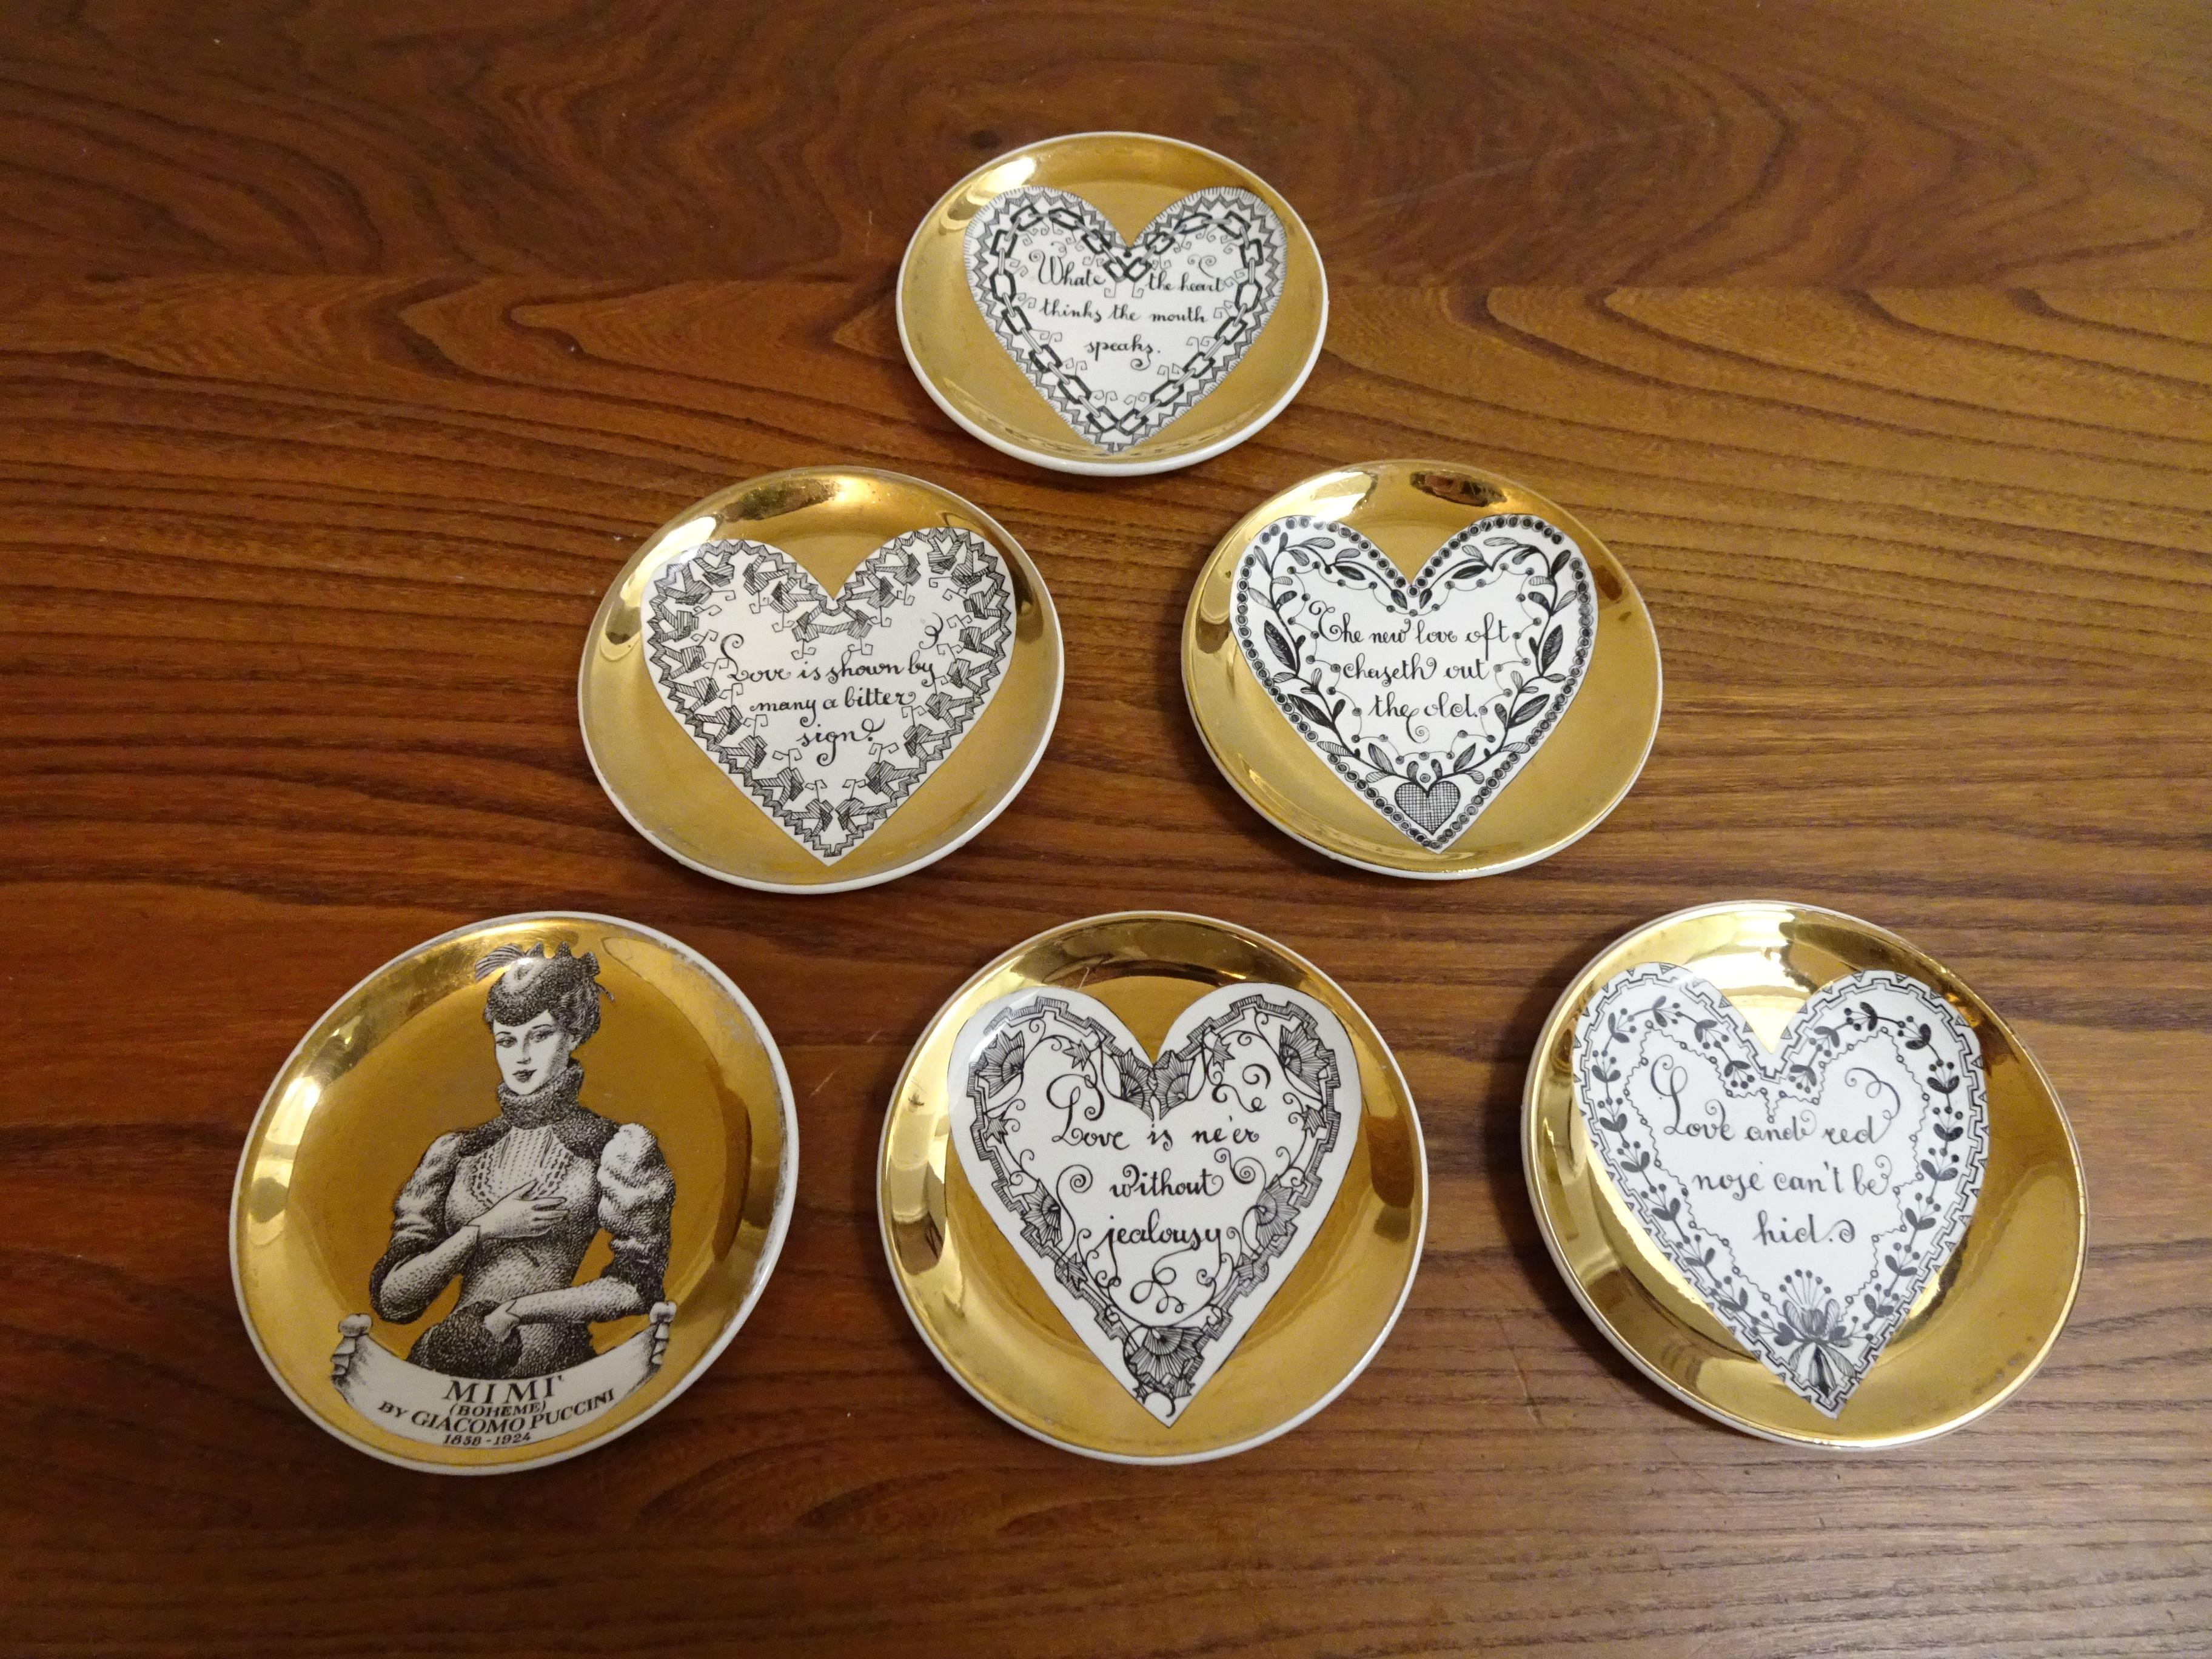 Lot of 6 animated and illustrated plates by Piero Fornasetti. 

Very good condition

Dimensions: Diameter 10.5 cm.